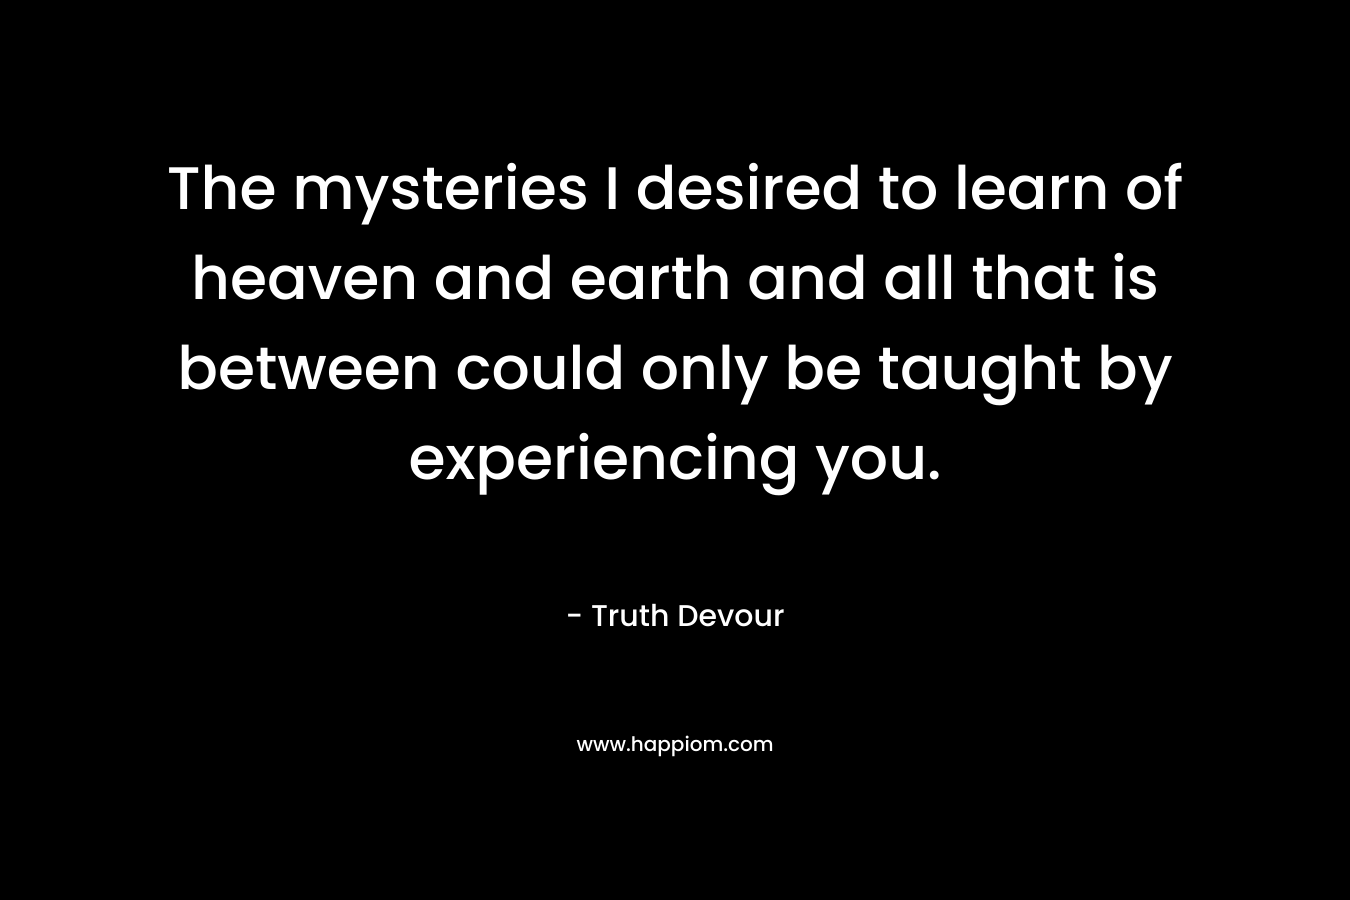 The mysteries I desired to learn of heaven and earth and all that is between could only be taught by experiencing you. – Truth Devour